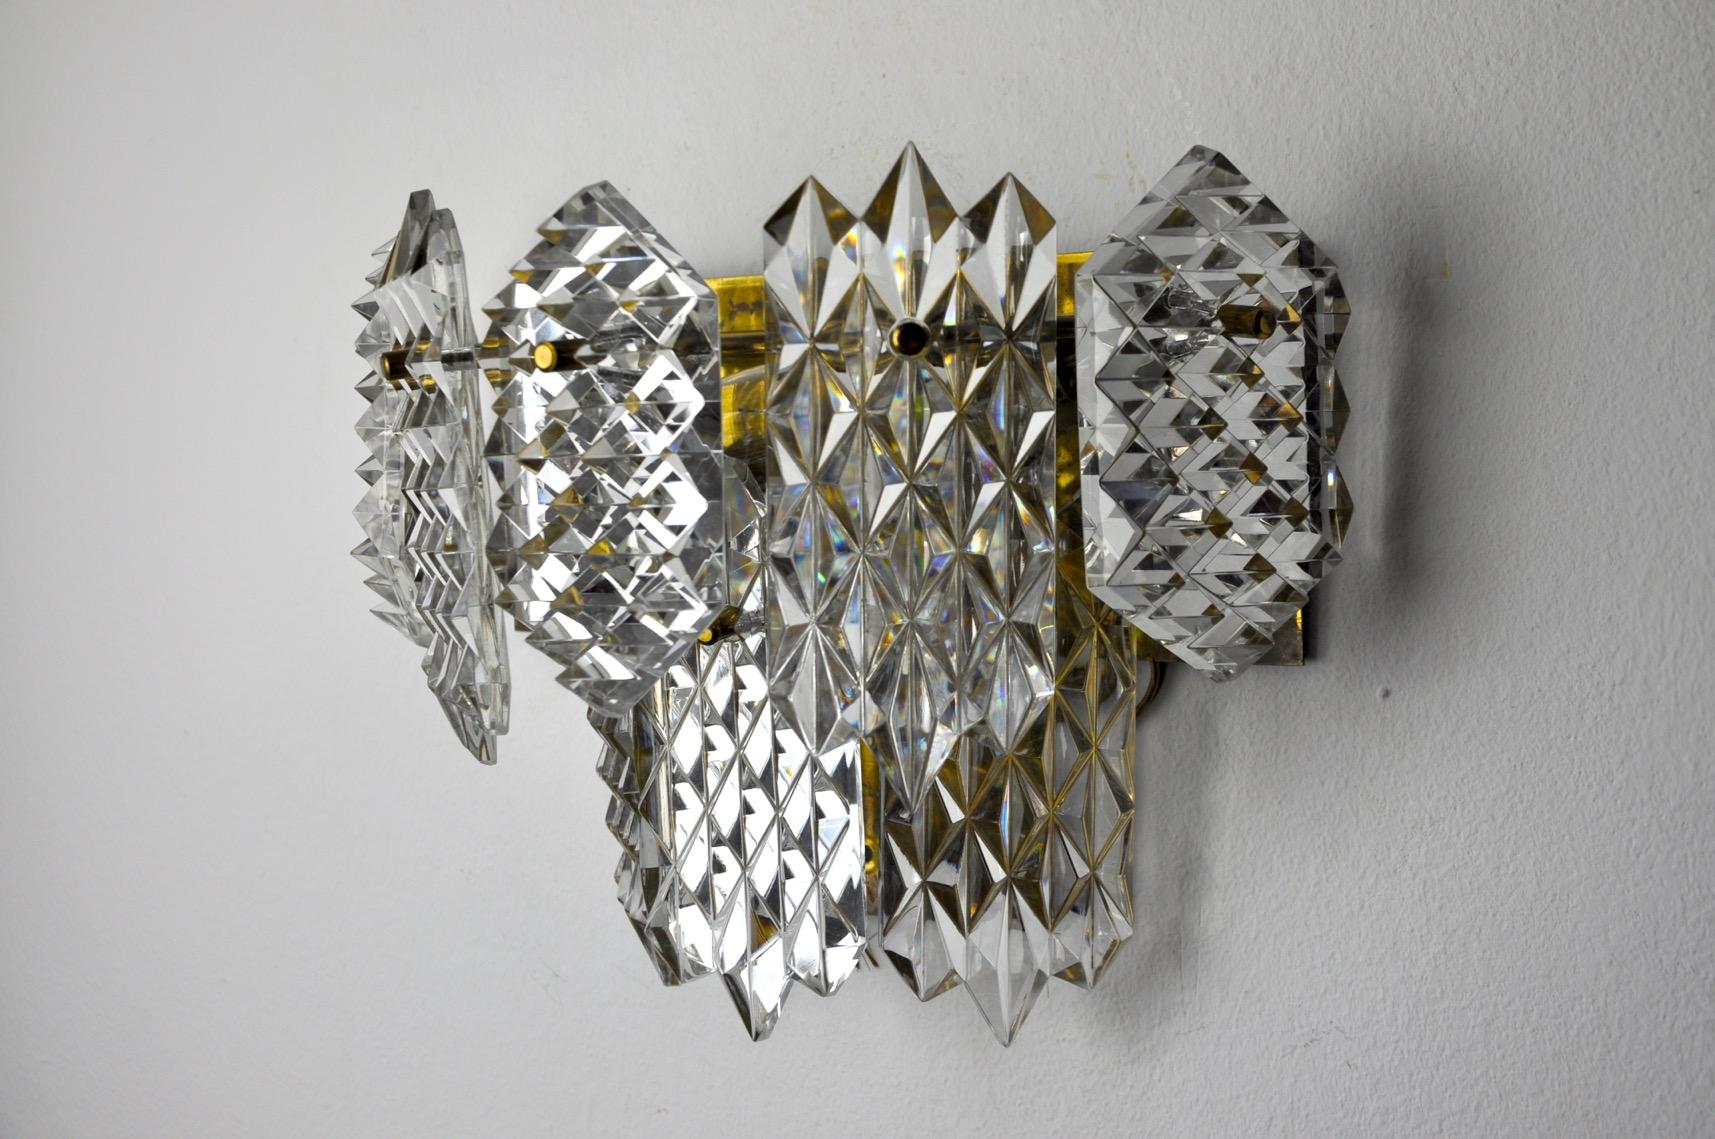 Superb kinkeldey wall lamp designed and produced in Germany in the 1970s.8 cut crystals distributed on two levels of a golden metal structure. Very beautiful object design which will know how to illuminate your interior with wonder. Electricity